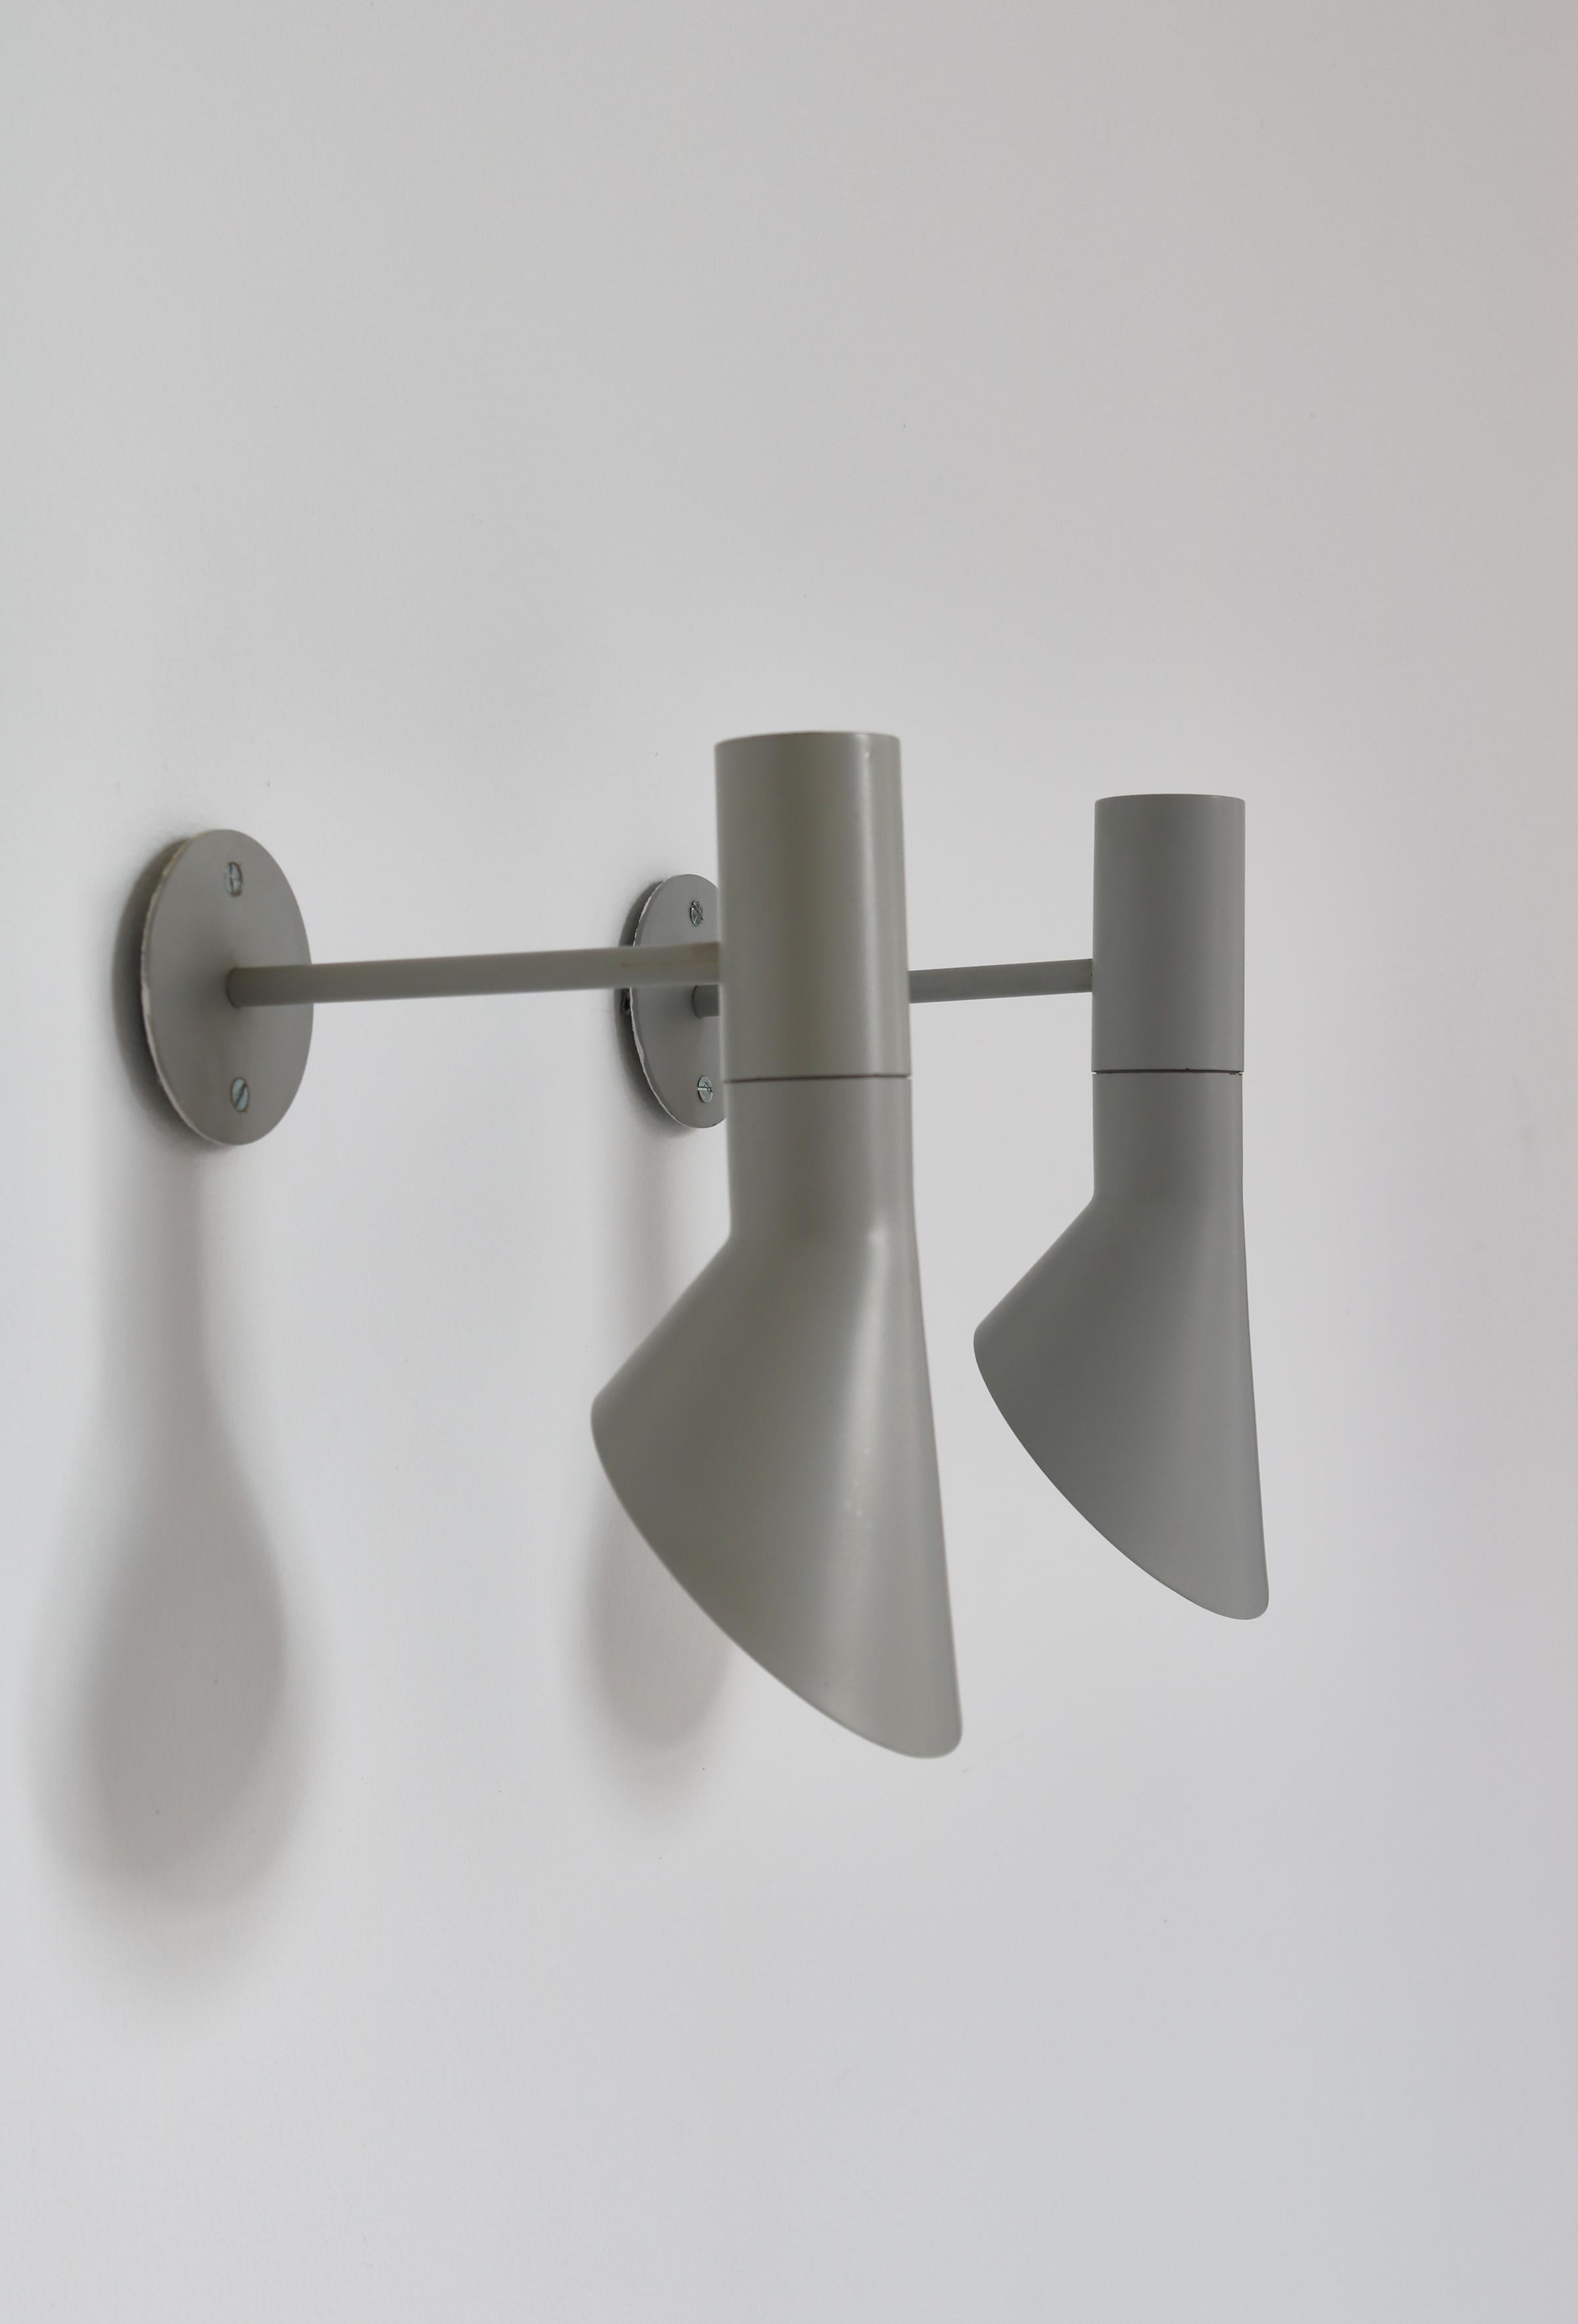 Early Example Arne Jacobsen Visor Wall Lamps in Grey Lacquer Louis Poulsen, 1957 In Good Condition For Sale In Odense, DK